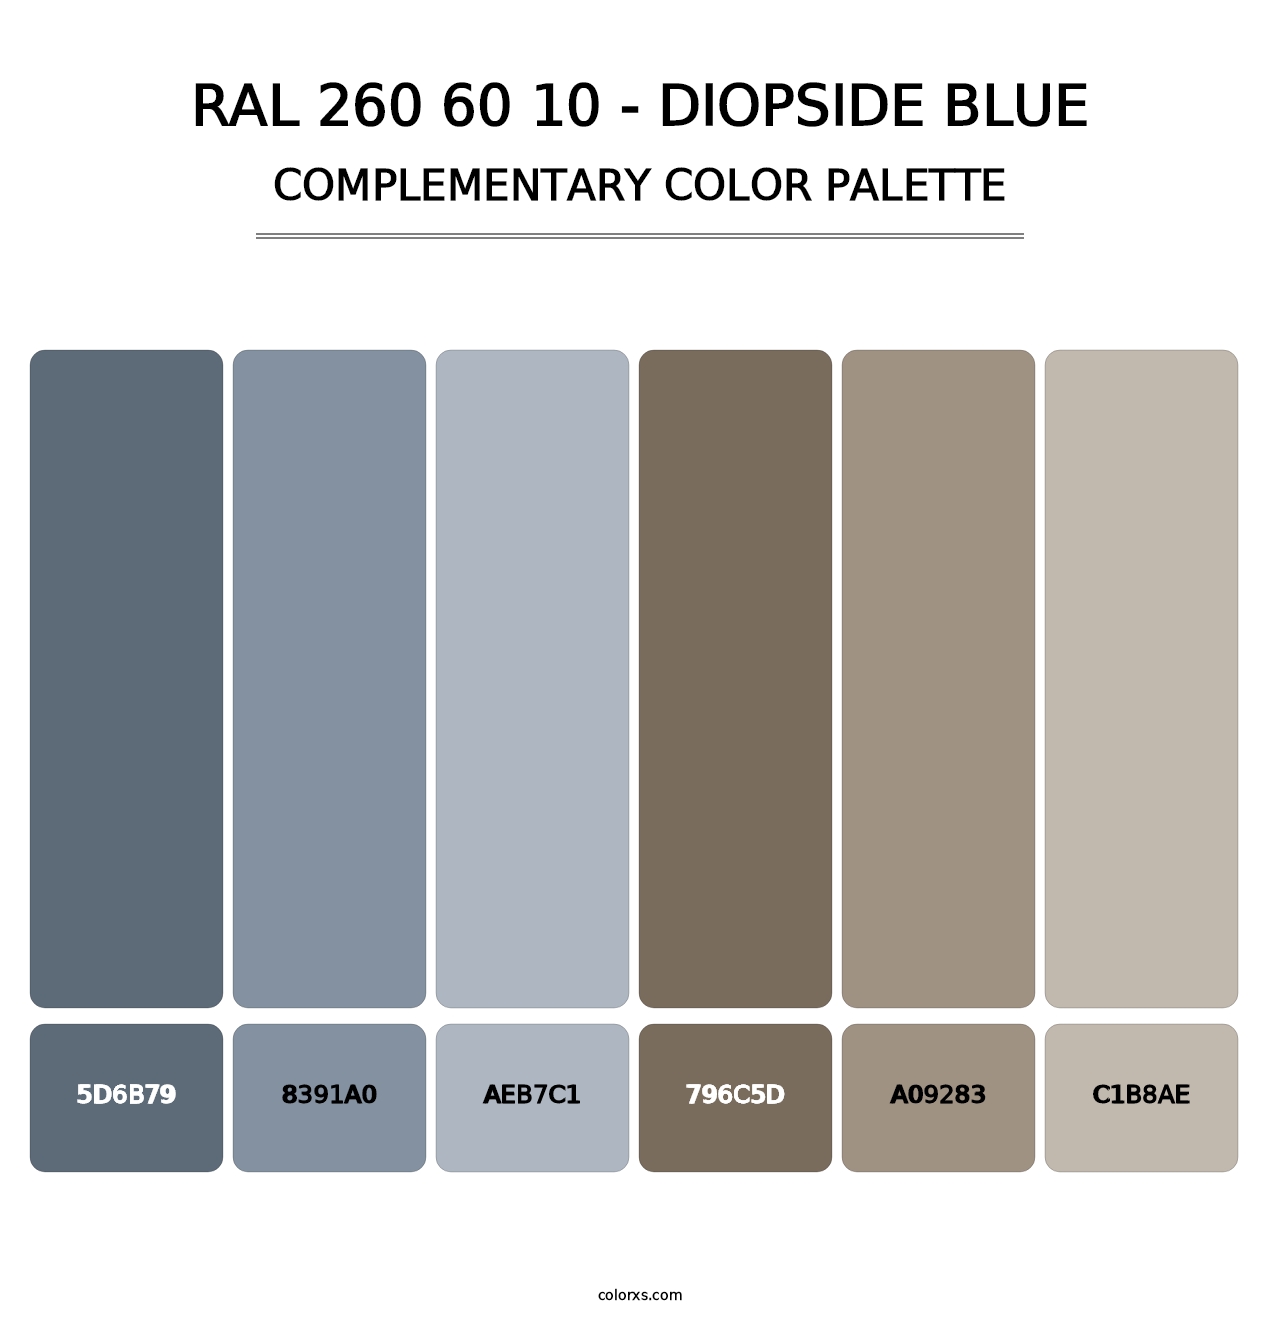 RAL 260 60 10 - Diopside Blue - Complementary Color Palette